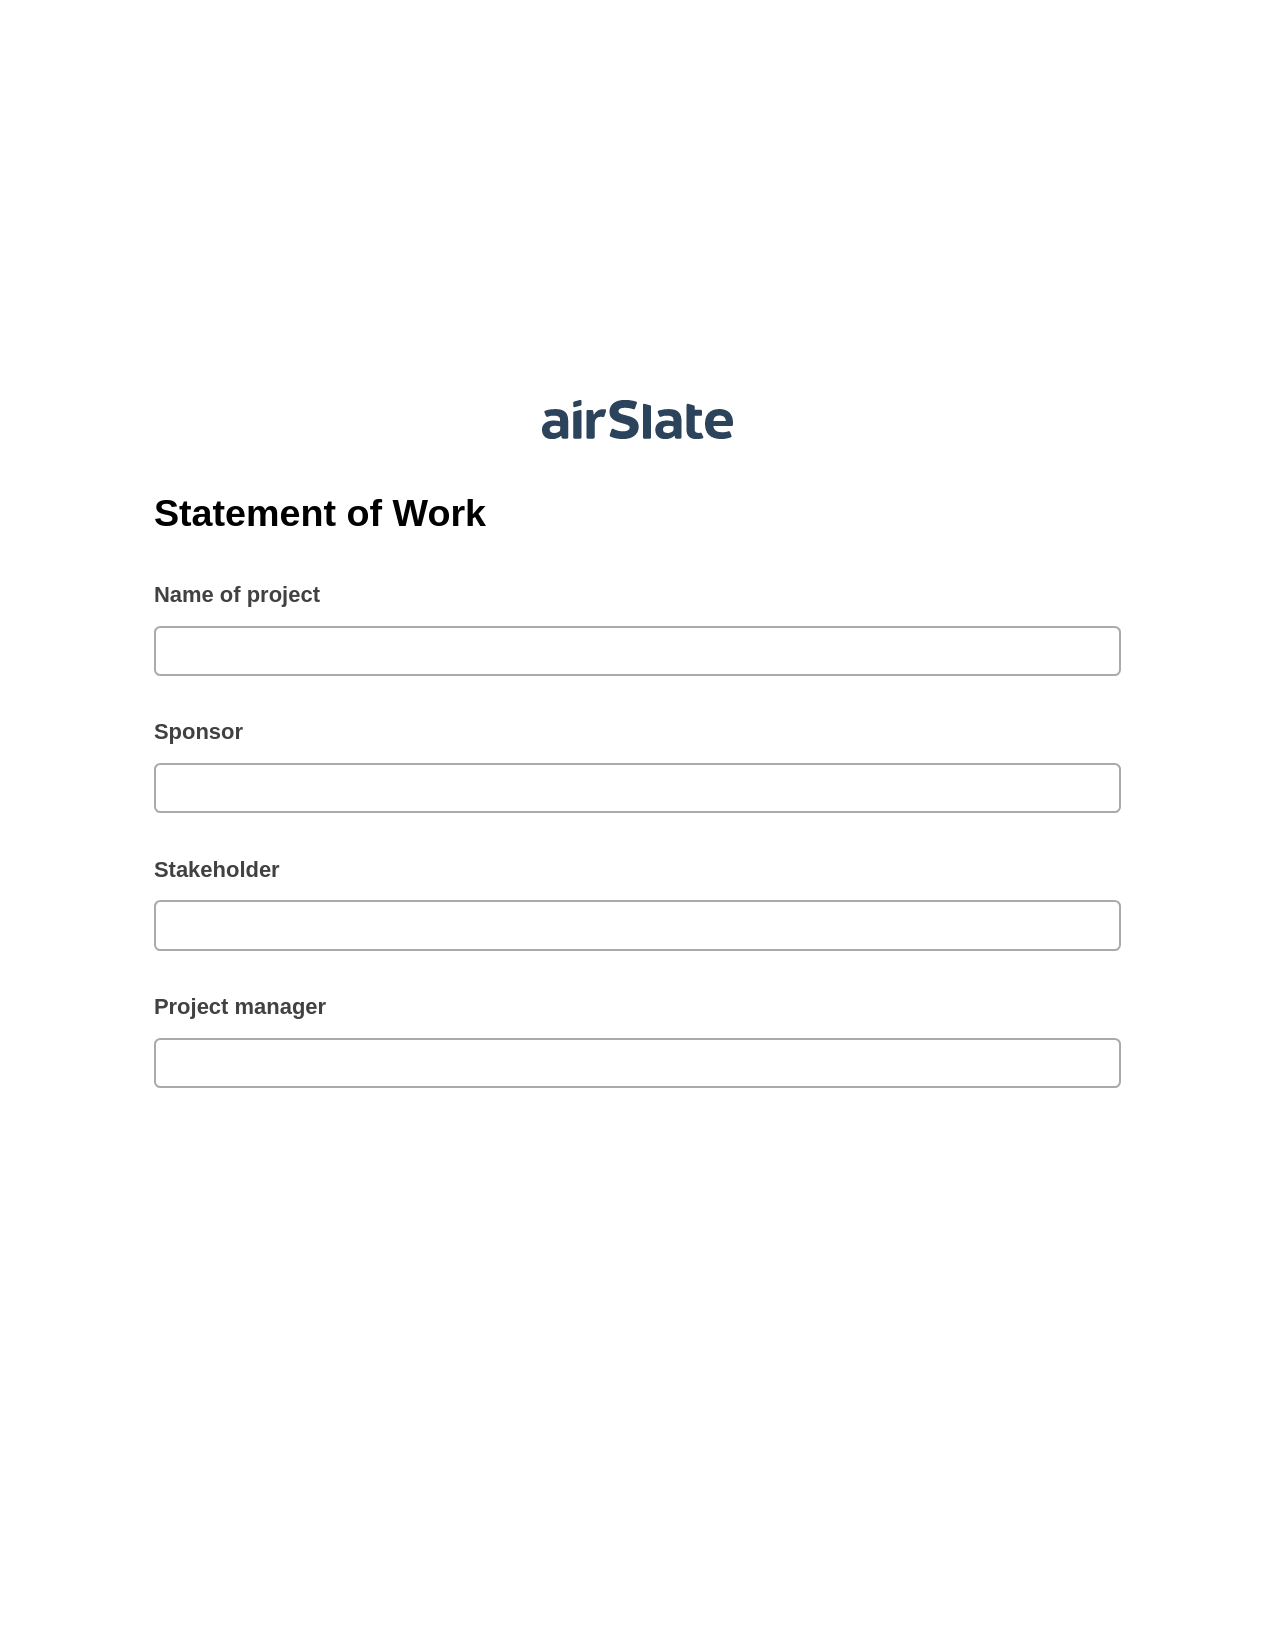 Multirole Statement of Work Pre-fill Document Bot, Send a Slate with Roles Bot, Dropbox Bot